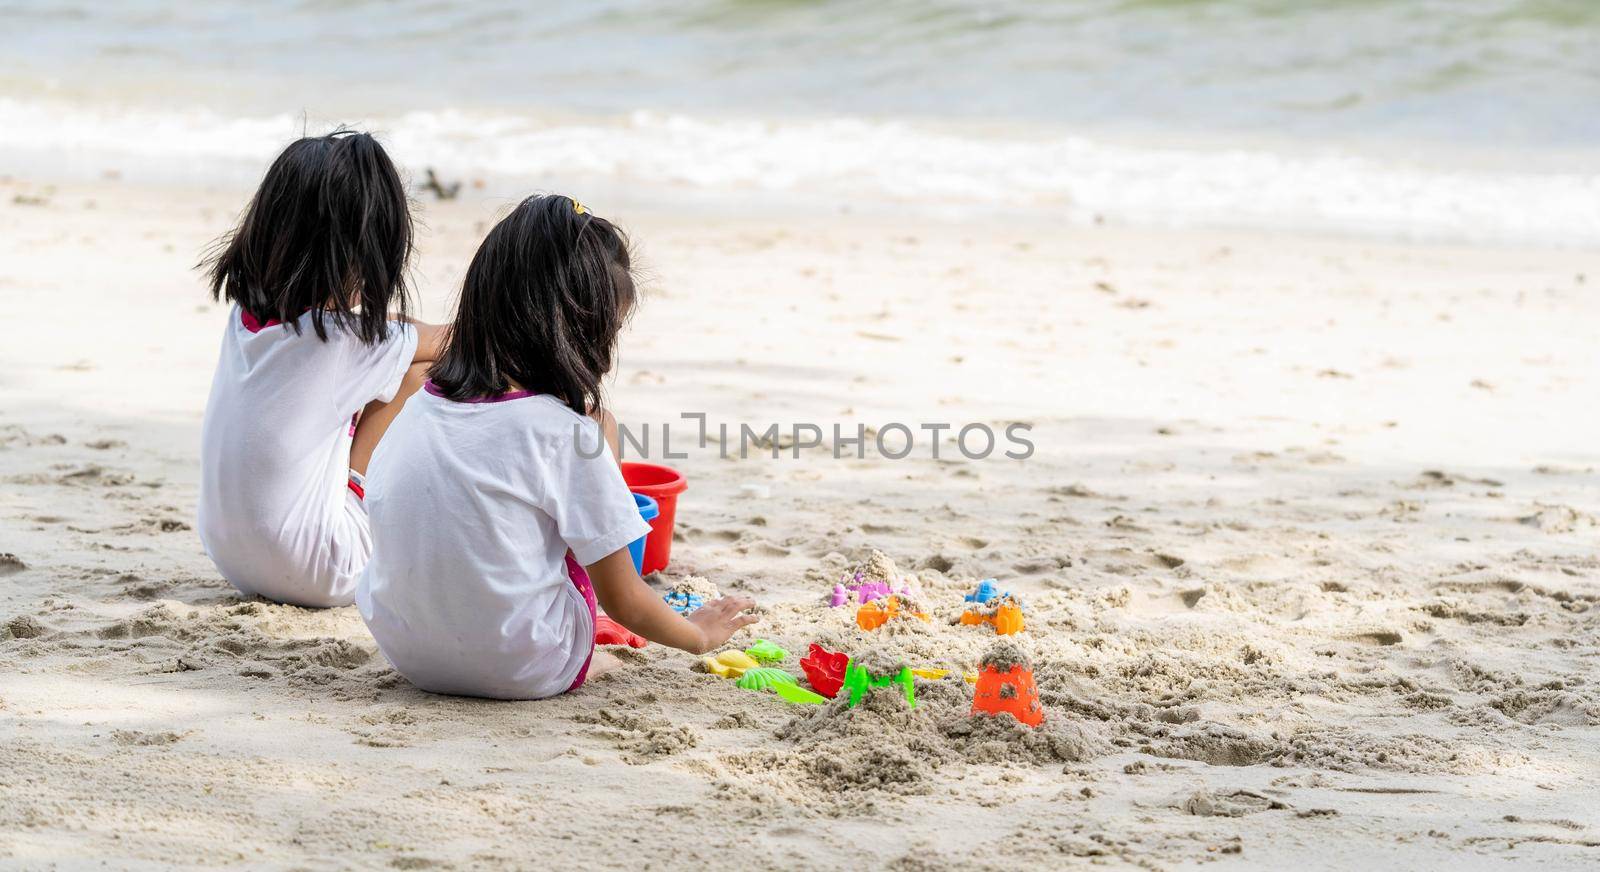 Twin girls while playing beach toys and sitting on a beach sand with white sand and waves